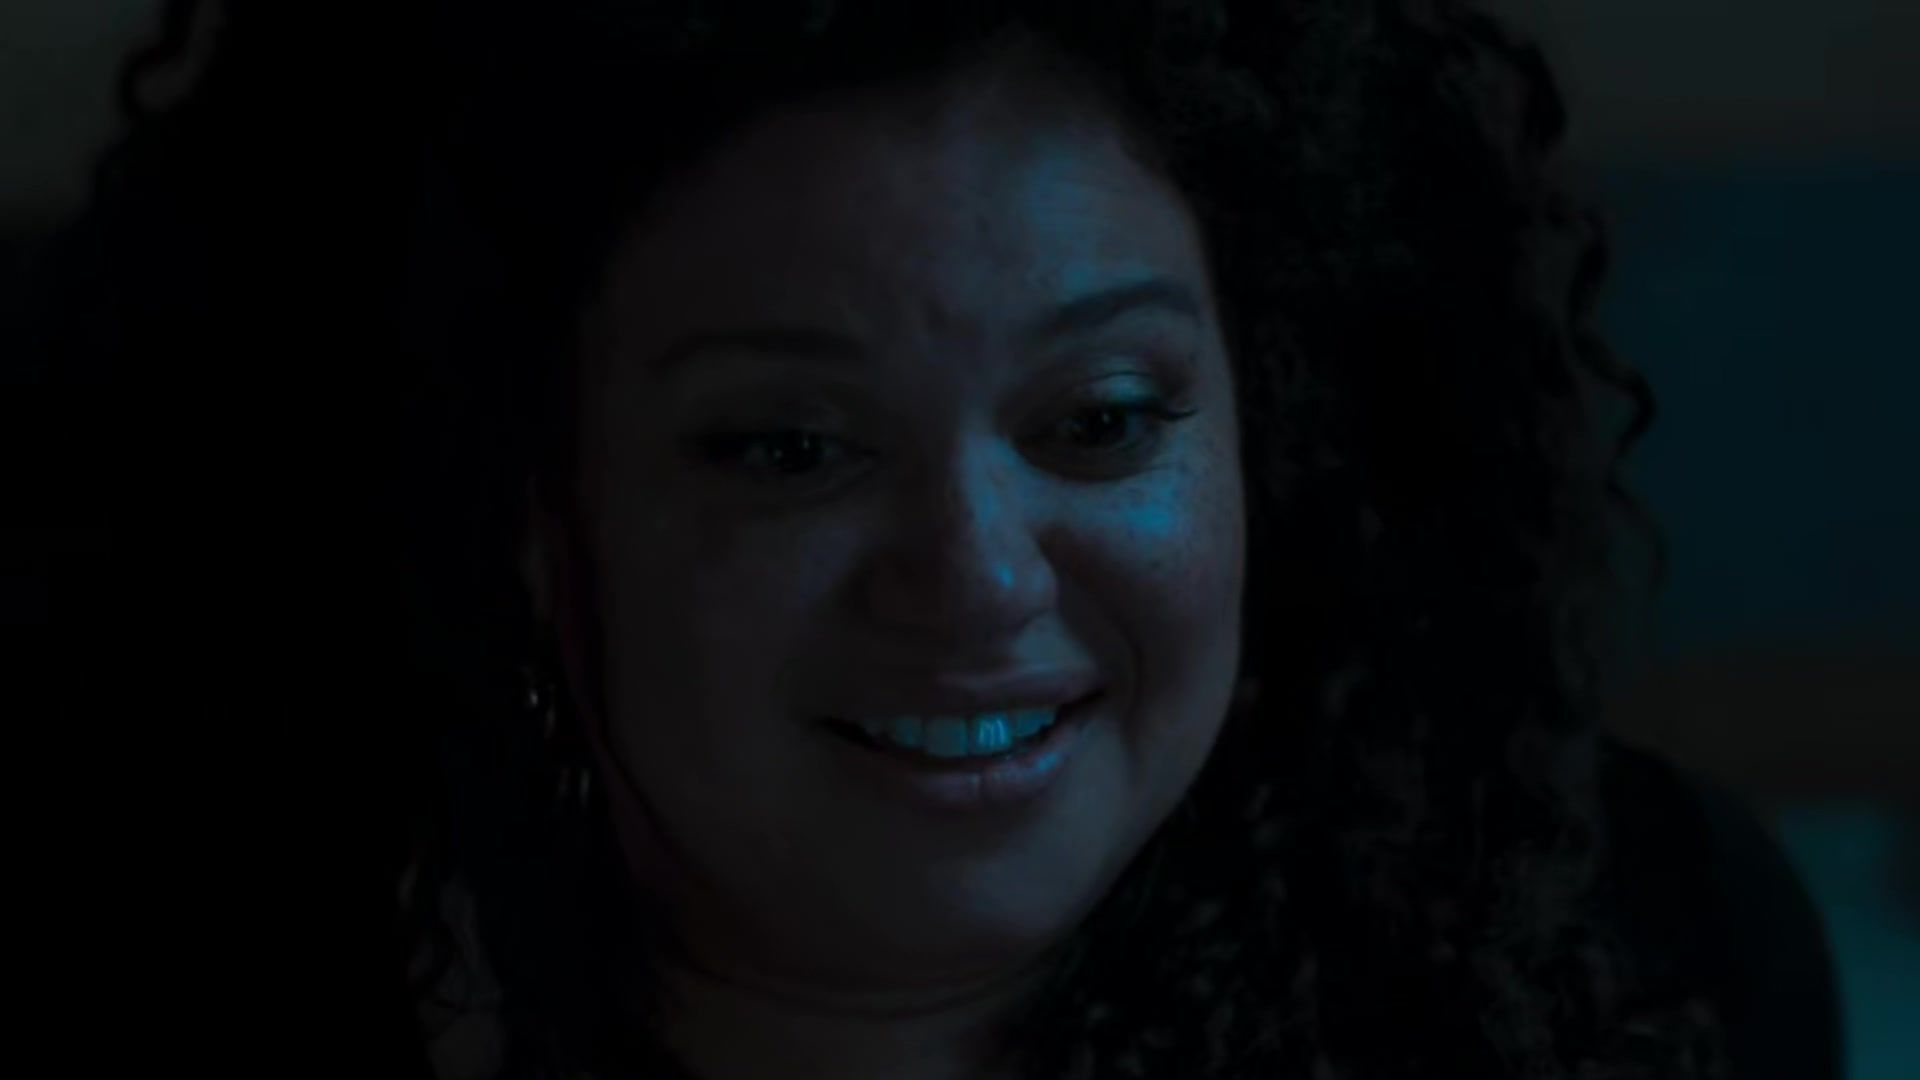 Lovers Nude Michelle Buteau - The First Wives Club s01e01 (2019) Foot Worship - 1